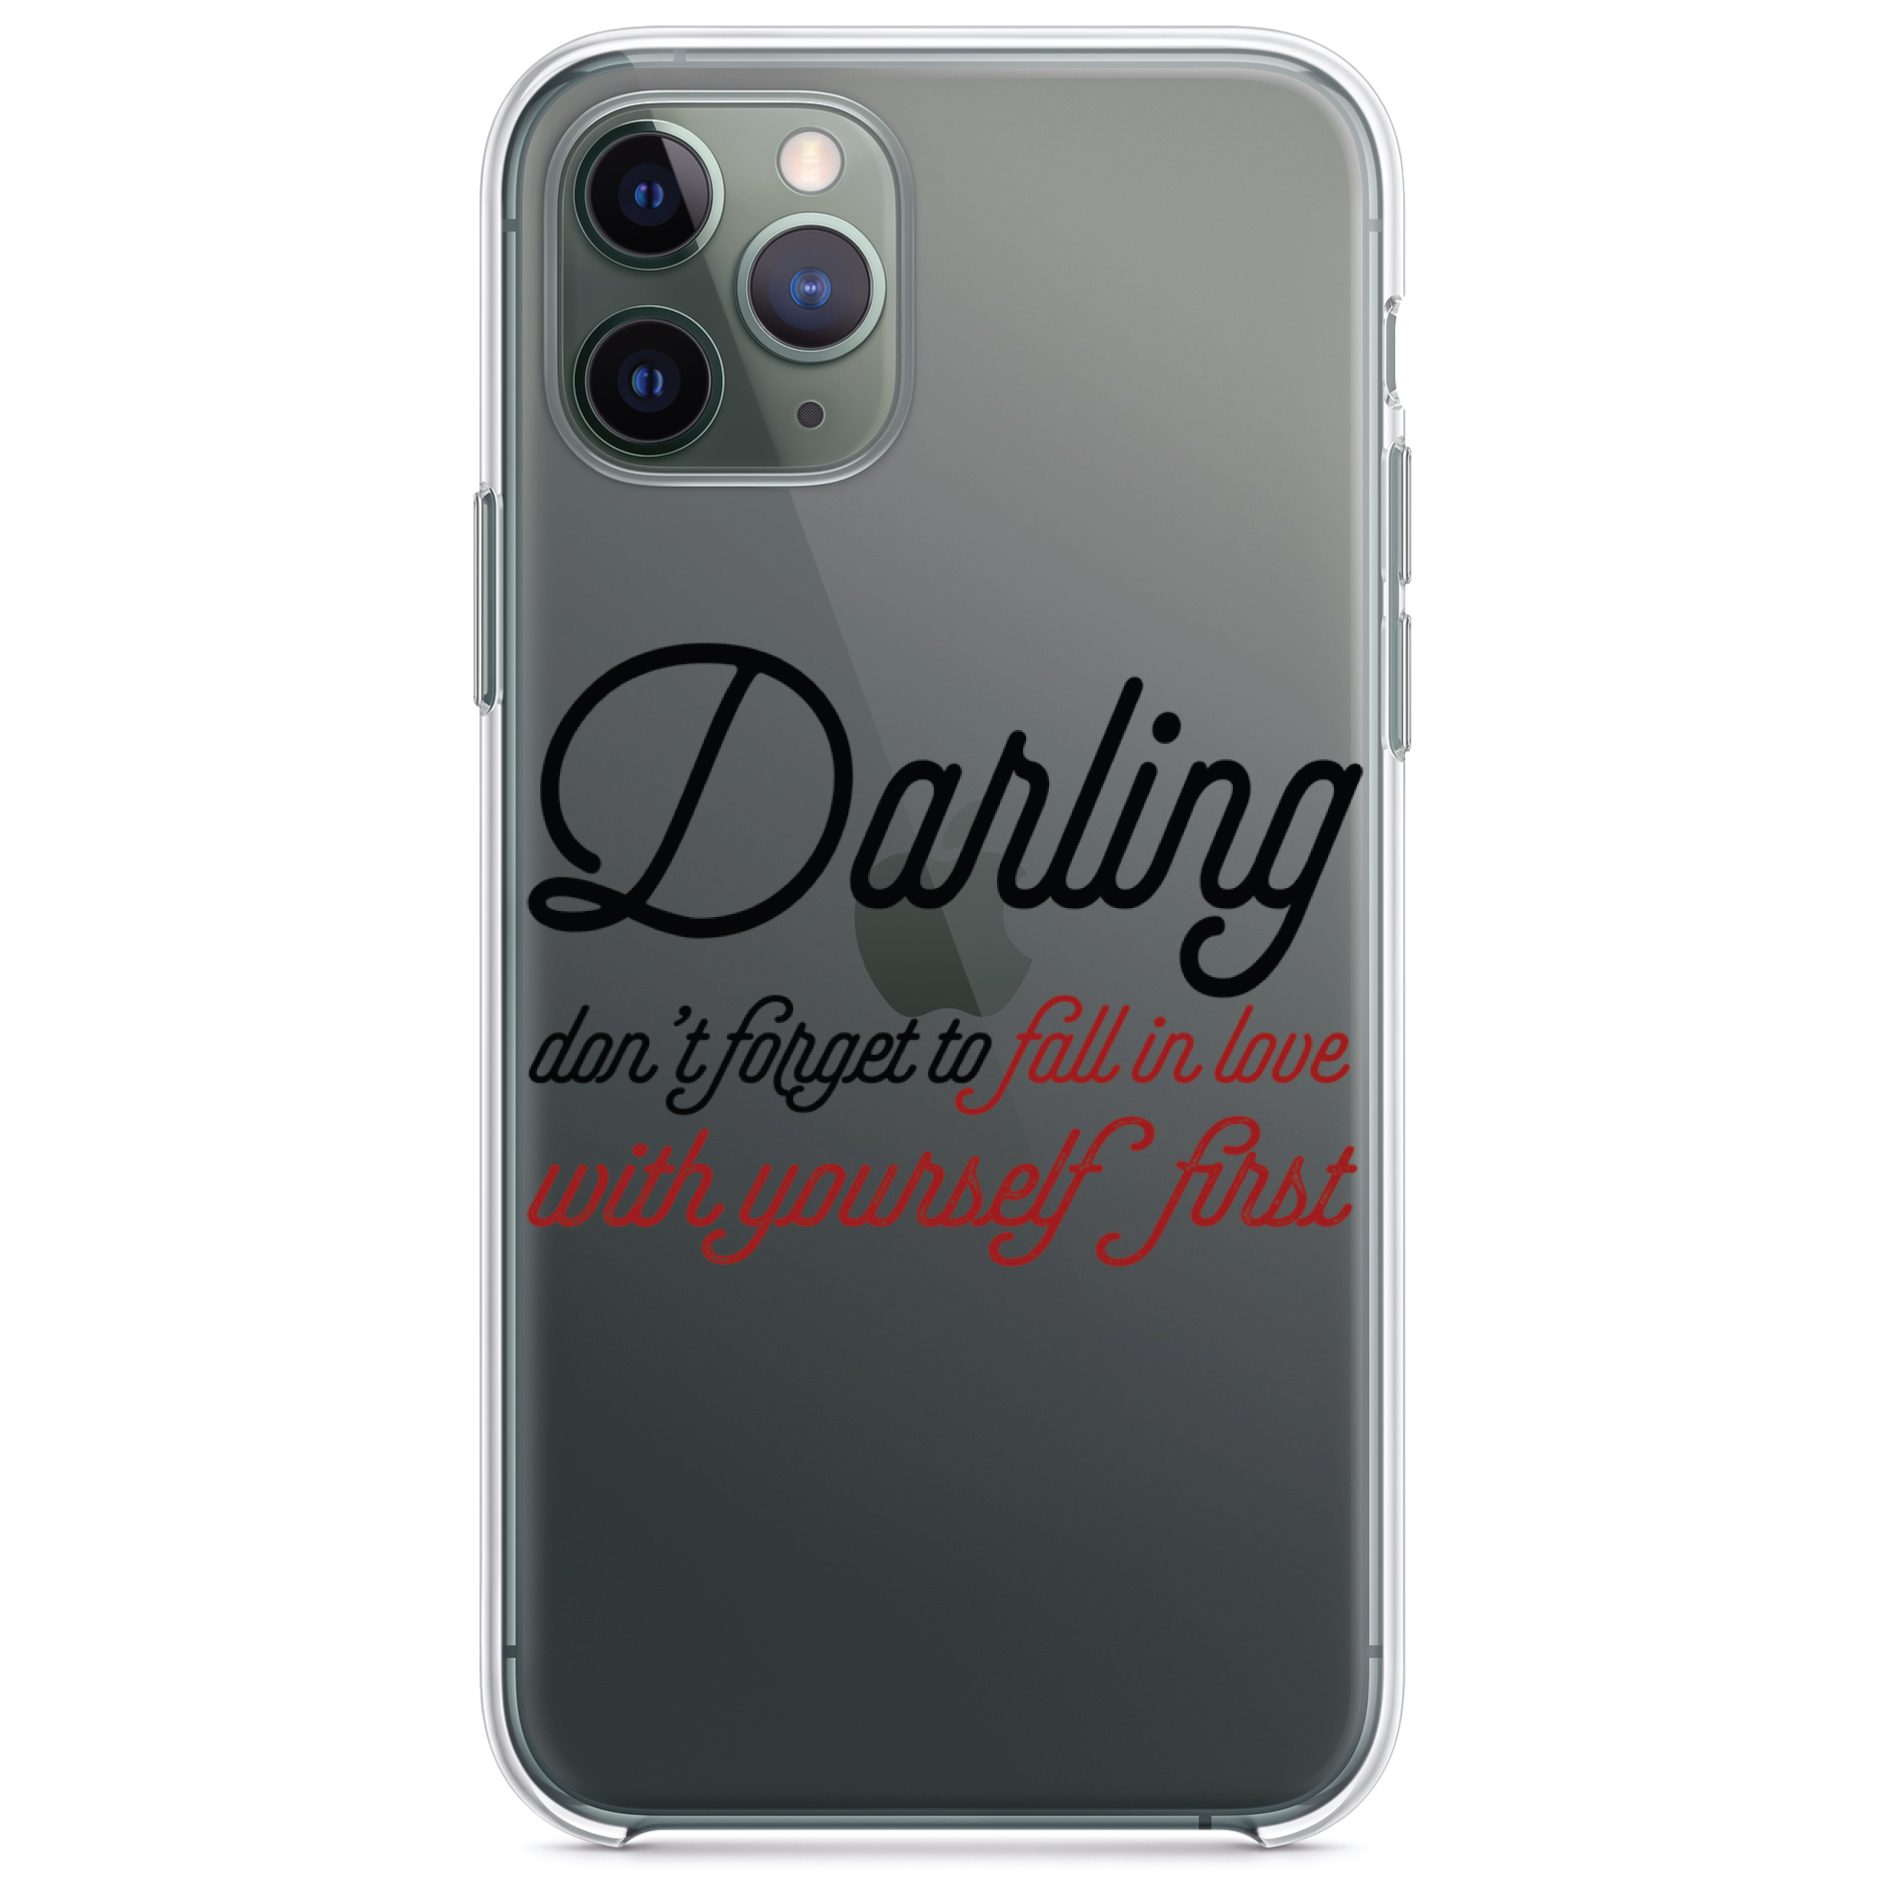 DistinctInk Clear Shockproof Hybrid Case for iPhone 11 (6.1" Screen) - TPU Bumper Acrylic Back Tempered Glass Screen Protector - Darling Don't Forget to Fall In Love with Yourself - image 1 of 1